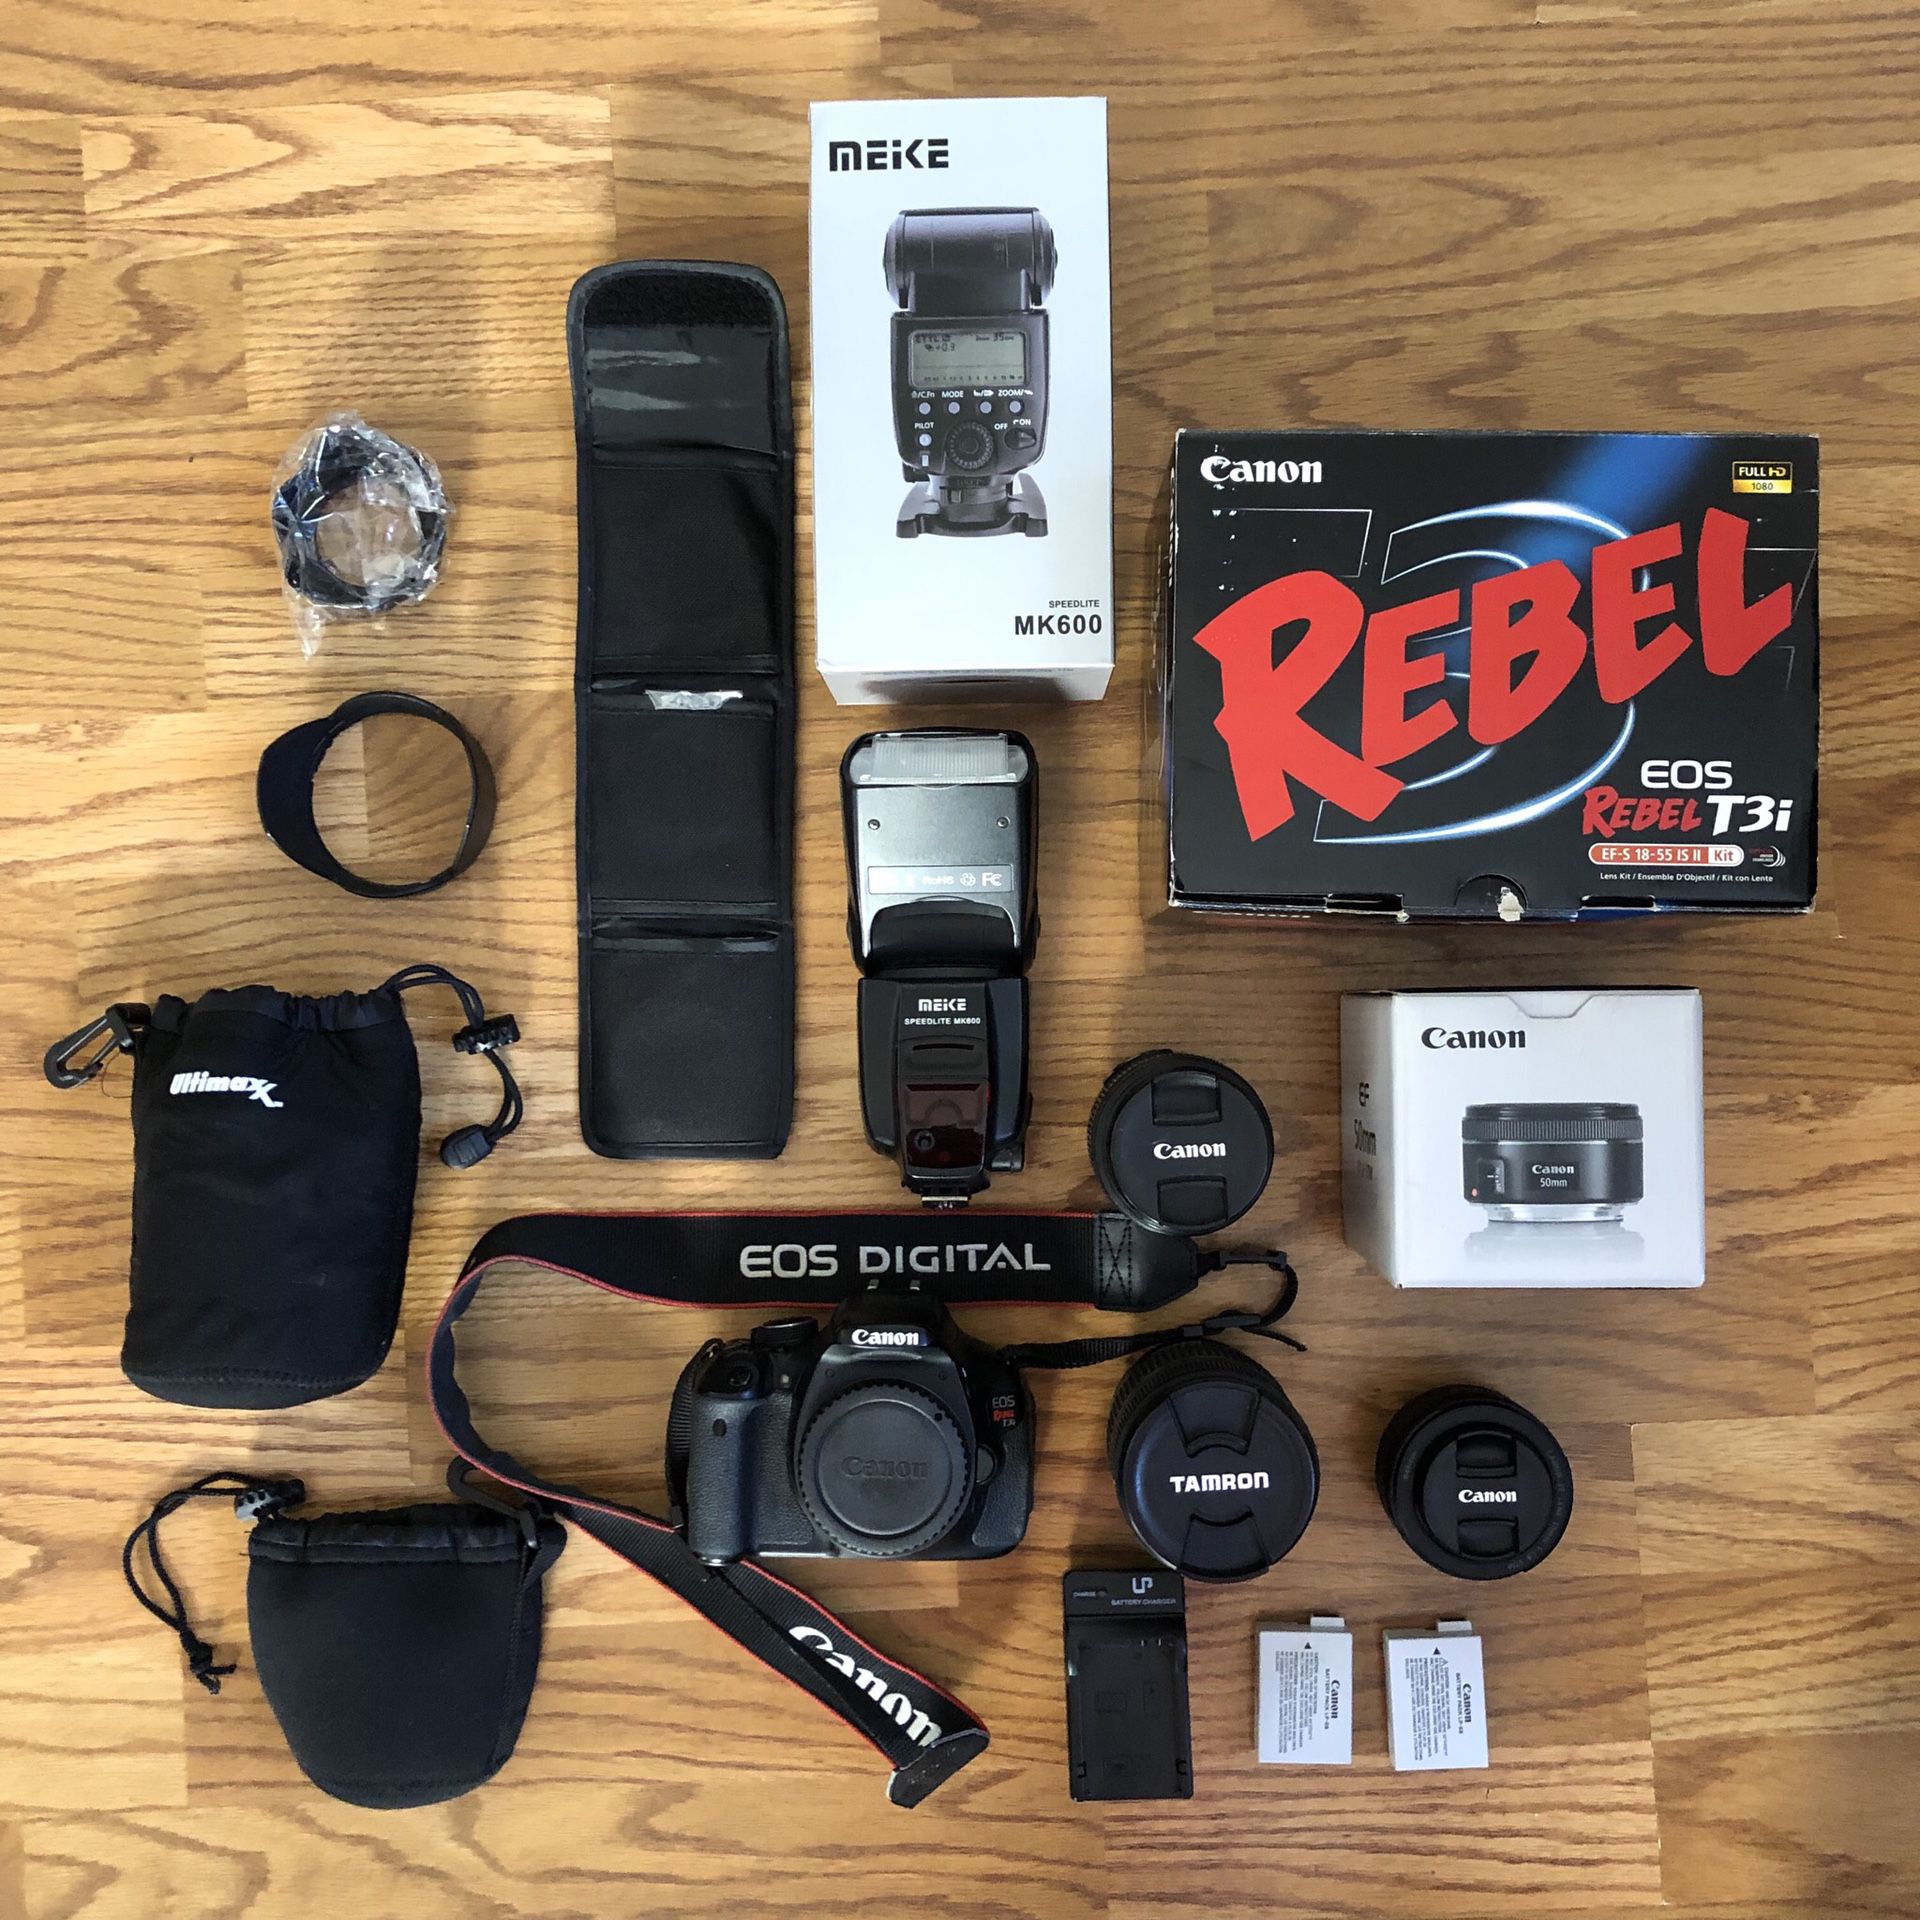 Canon EOS Rebel T3i EF-S 18-55mm f/3.5-5.6 IS II Lens Kit and much more!